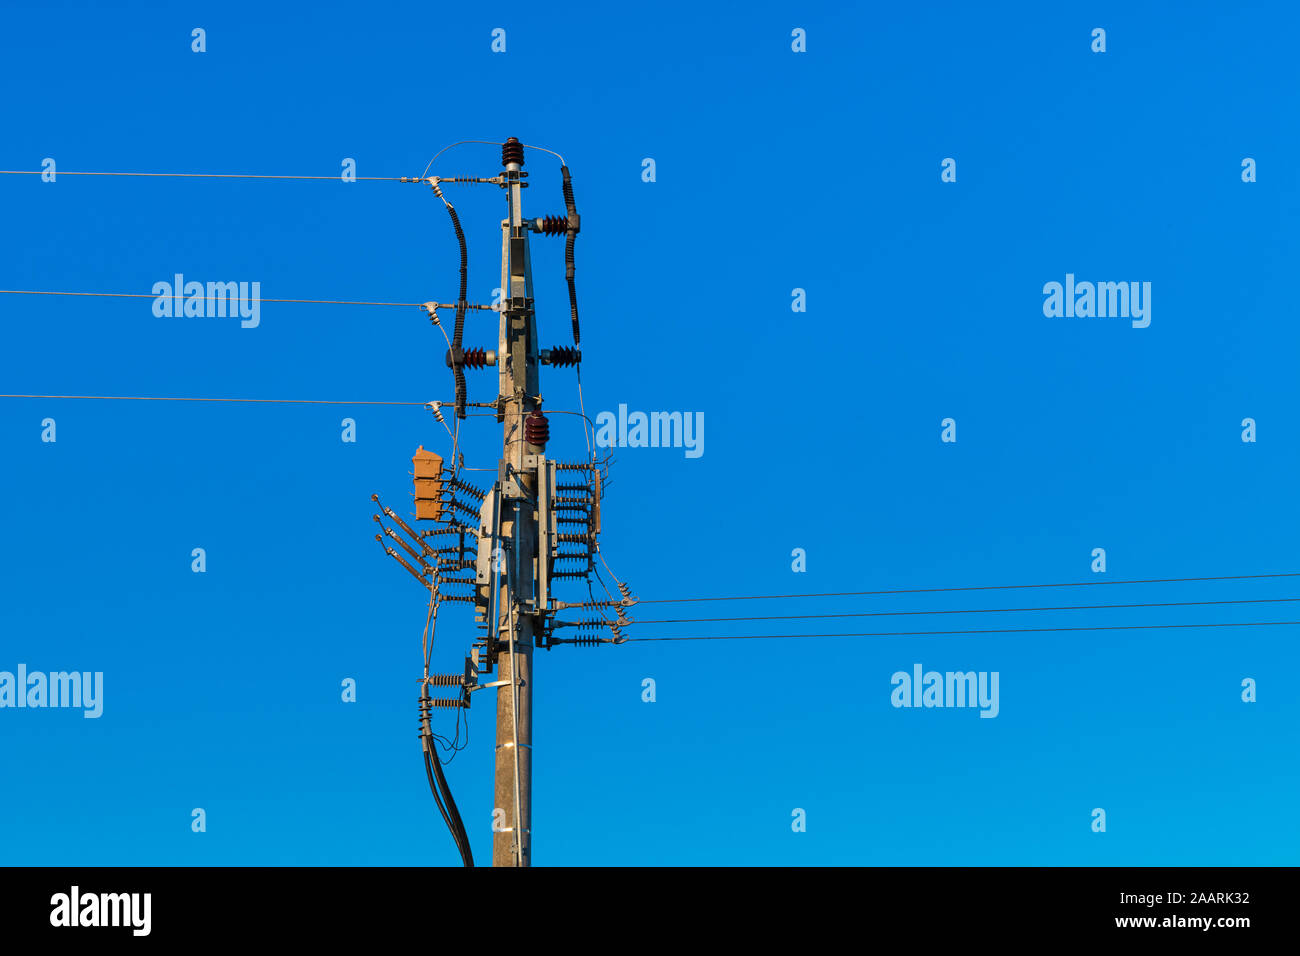 Medium voltage disconnectors on electricity pylon. Power line pole with wires and isolator switches on blue sky background. For safe service or repair Stock Photo